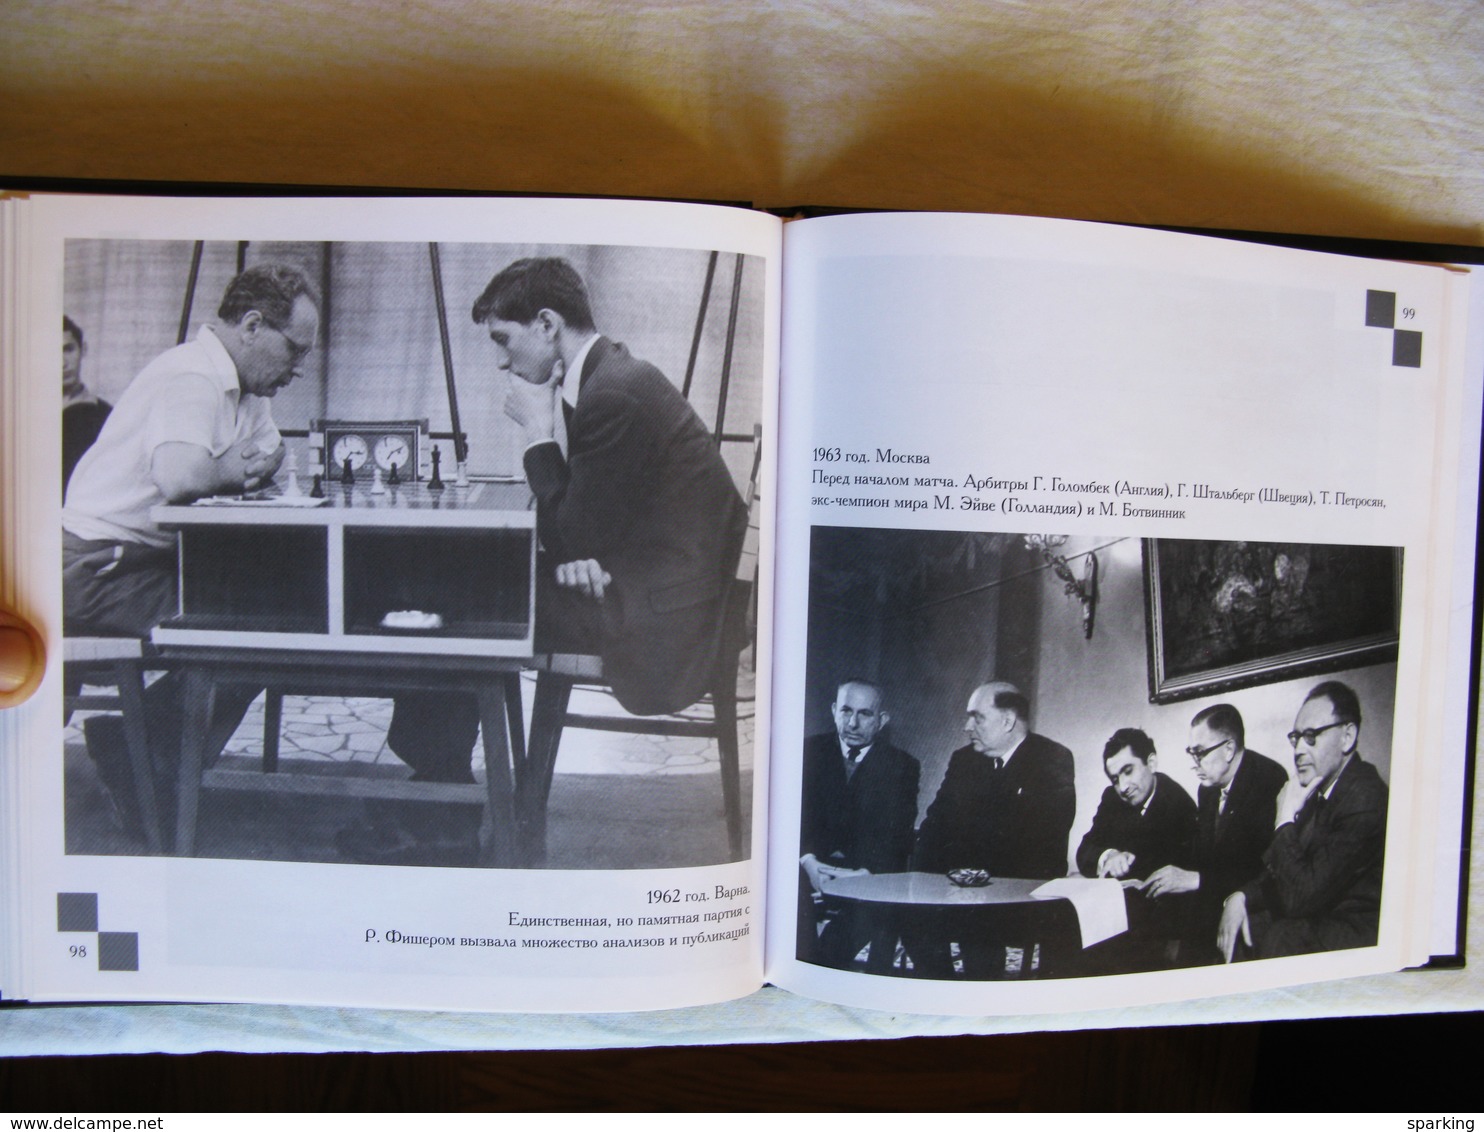 Chess. 2011. Mikhail Botvinnik: the news in pictures. Russian book